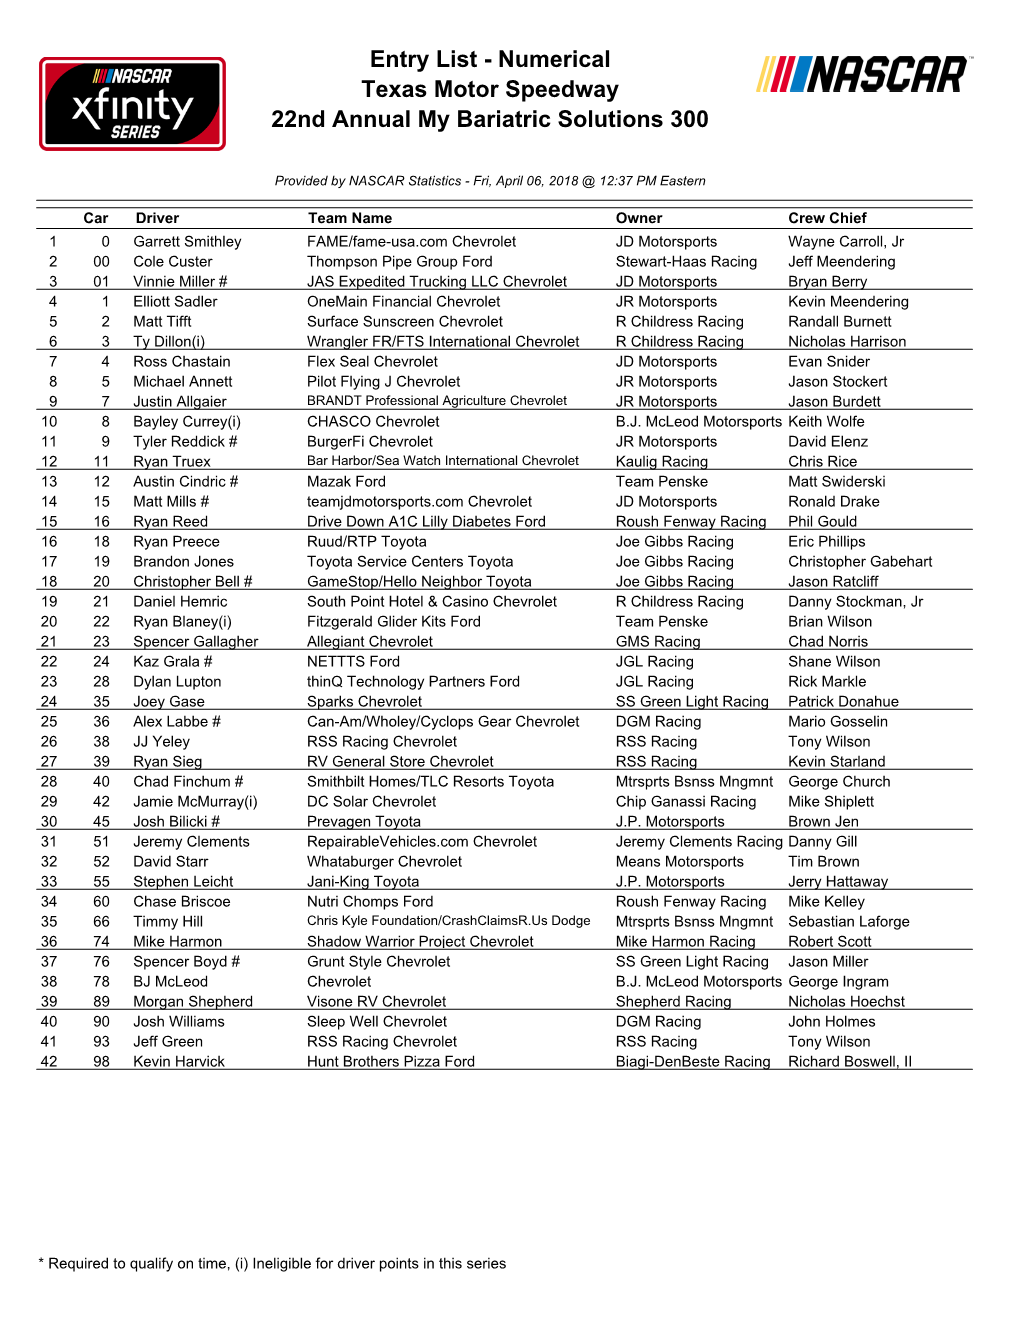 Entry List - Numerical Texas Motor Speedway 22Nd Annual My Bariatric Solutions 300